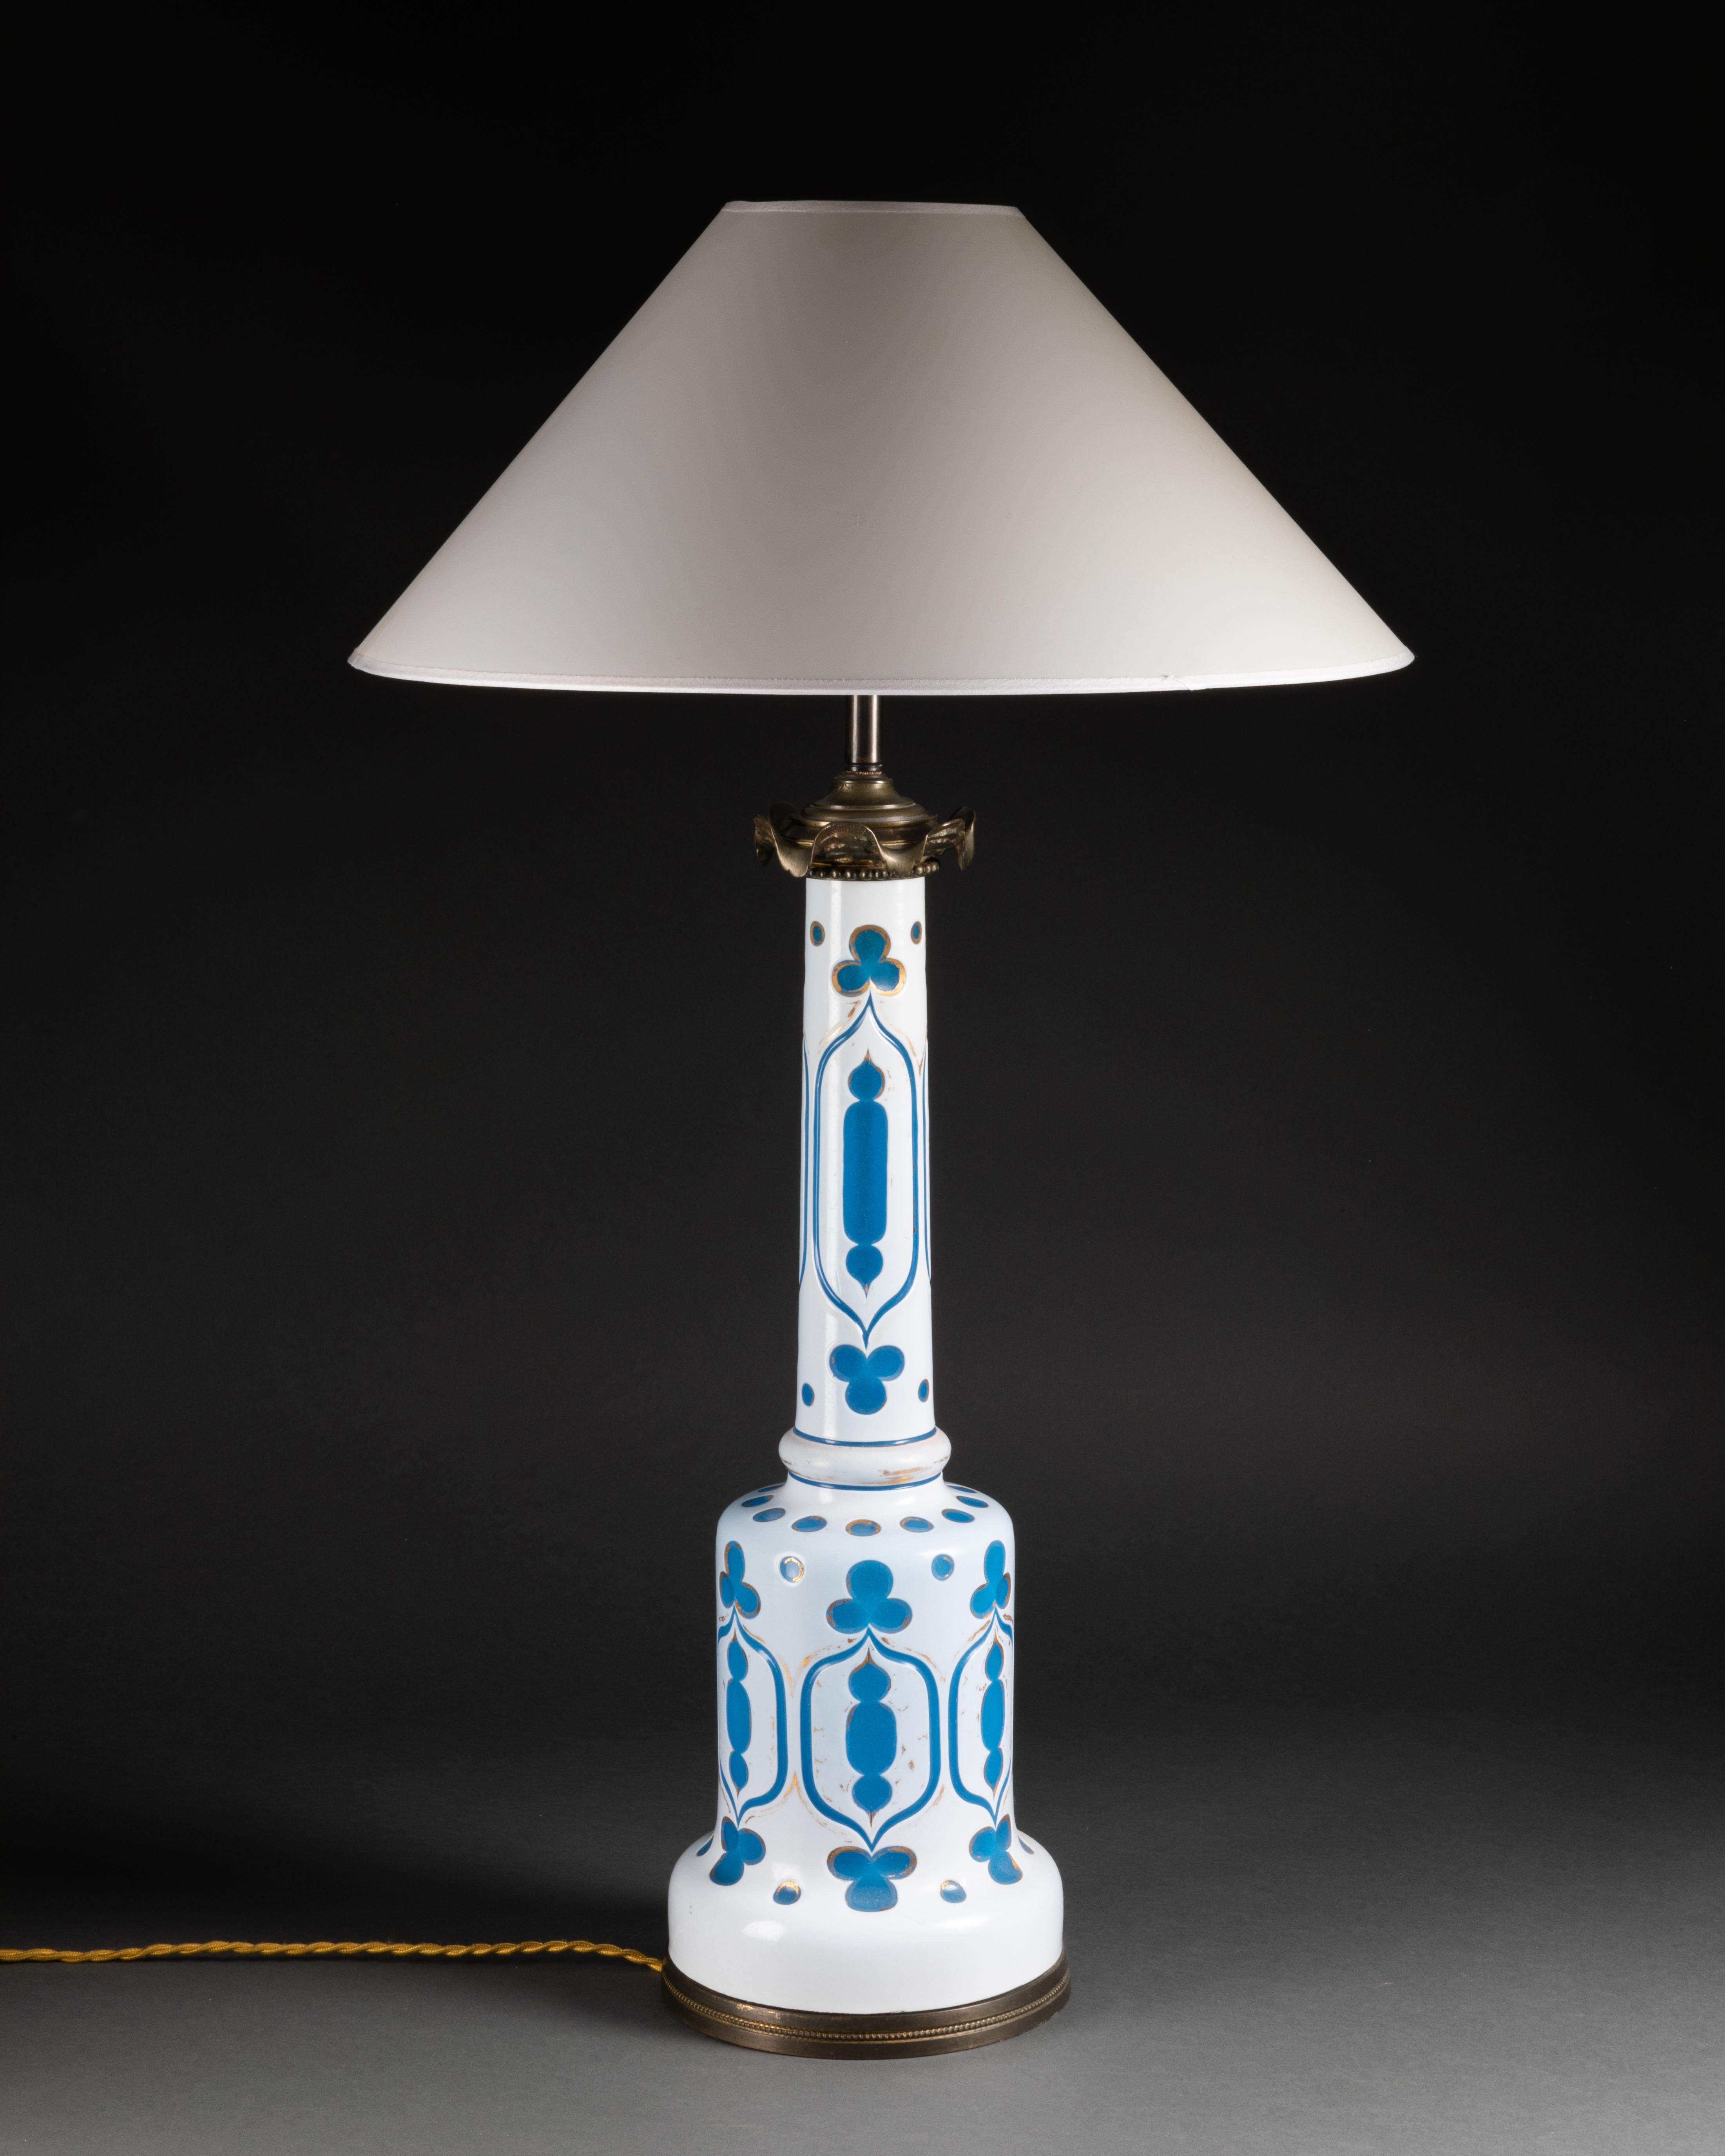 Blue and white overlay glass lamp from the iconic store of Madeleine Castaing. France, circa 1880. Purchased from Madeleine Castaing store in Paris in the 50’s. Wired to the EU standard. Sold with or without lampshade. Height to socket 64 cm.